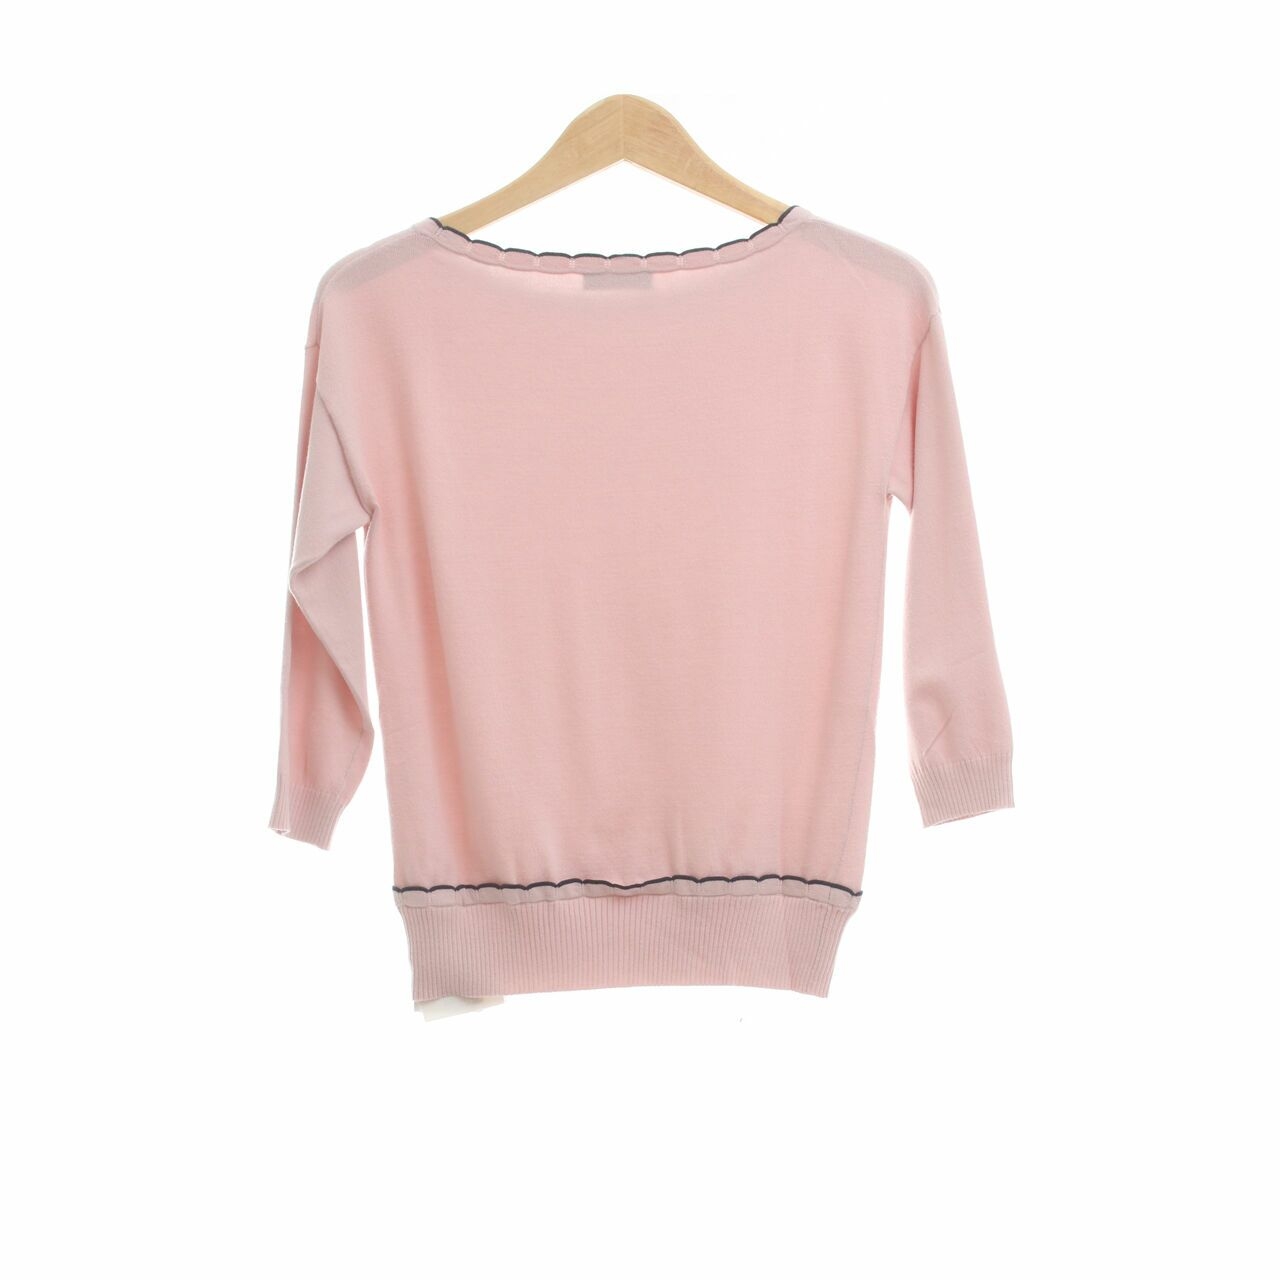 Max & Co. Pink Knit Blouse